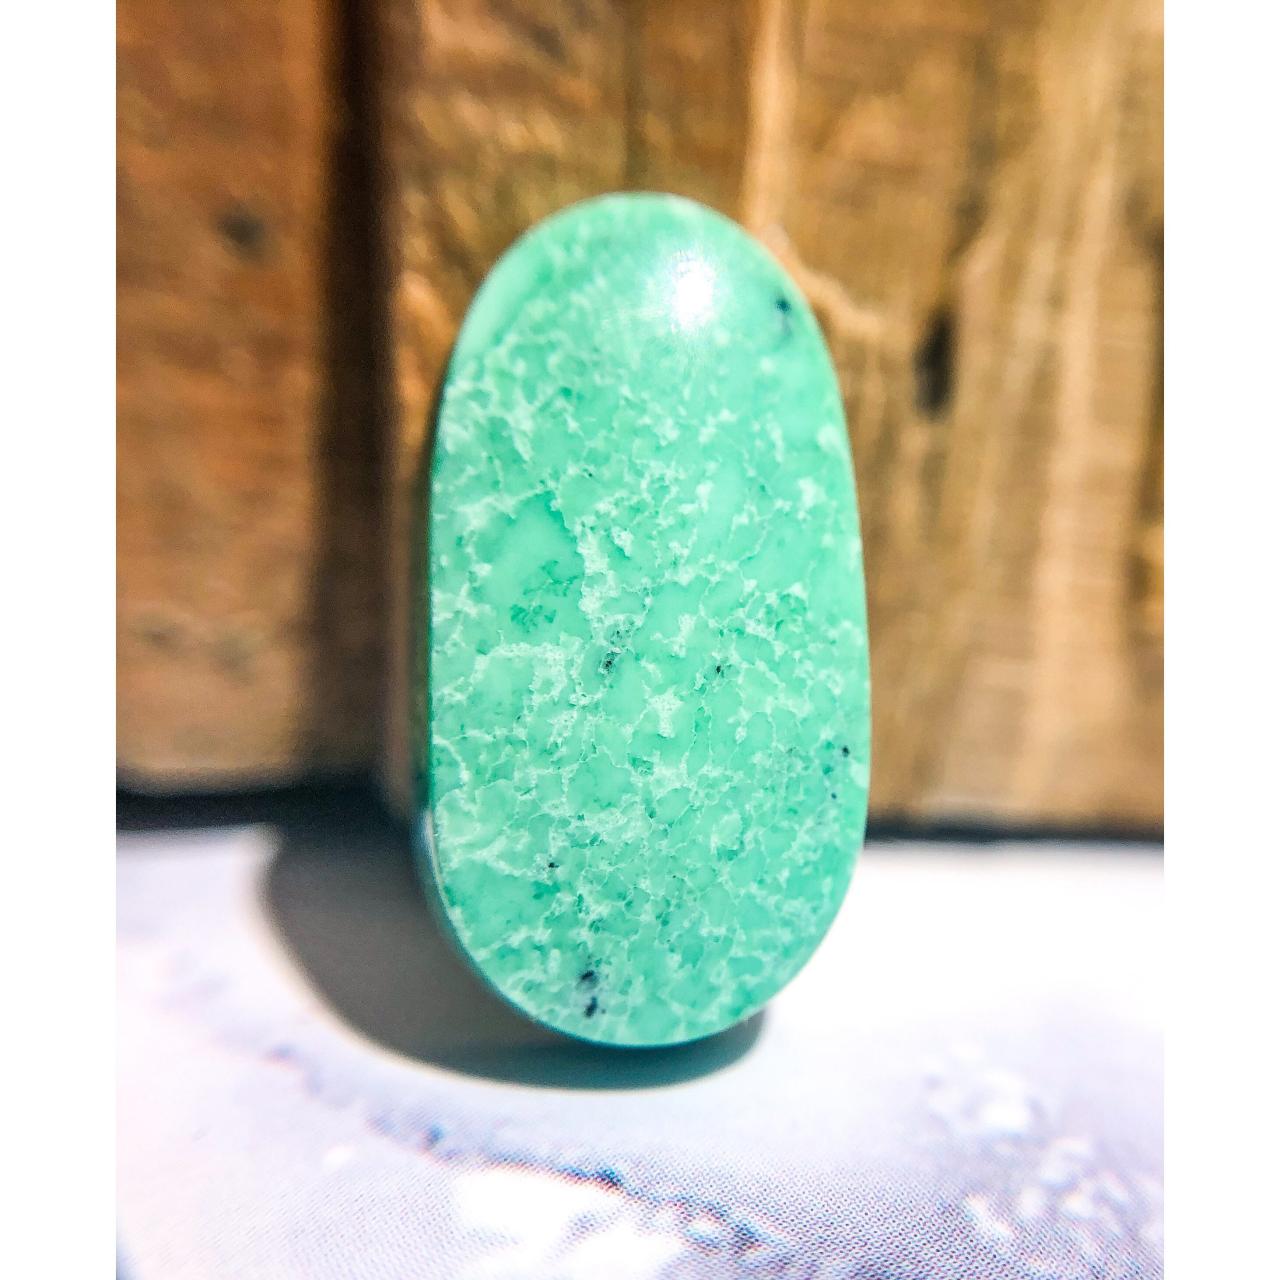 Lander Variscite Stone Available For Custom Ring, Turquoise Ring, Silver, Gold, Rose Gold, Or Copper Rings